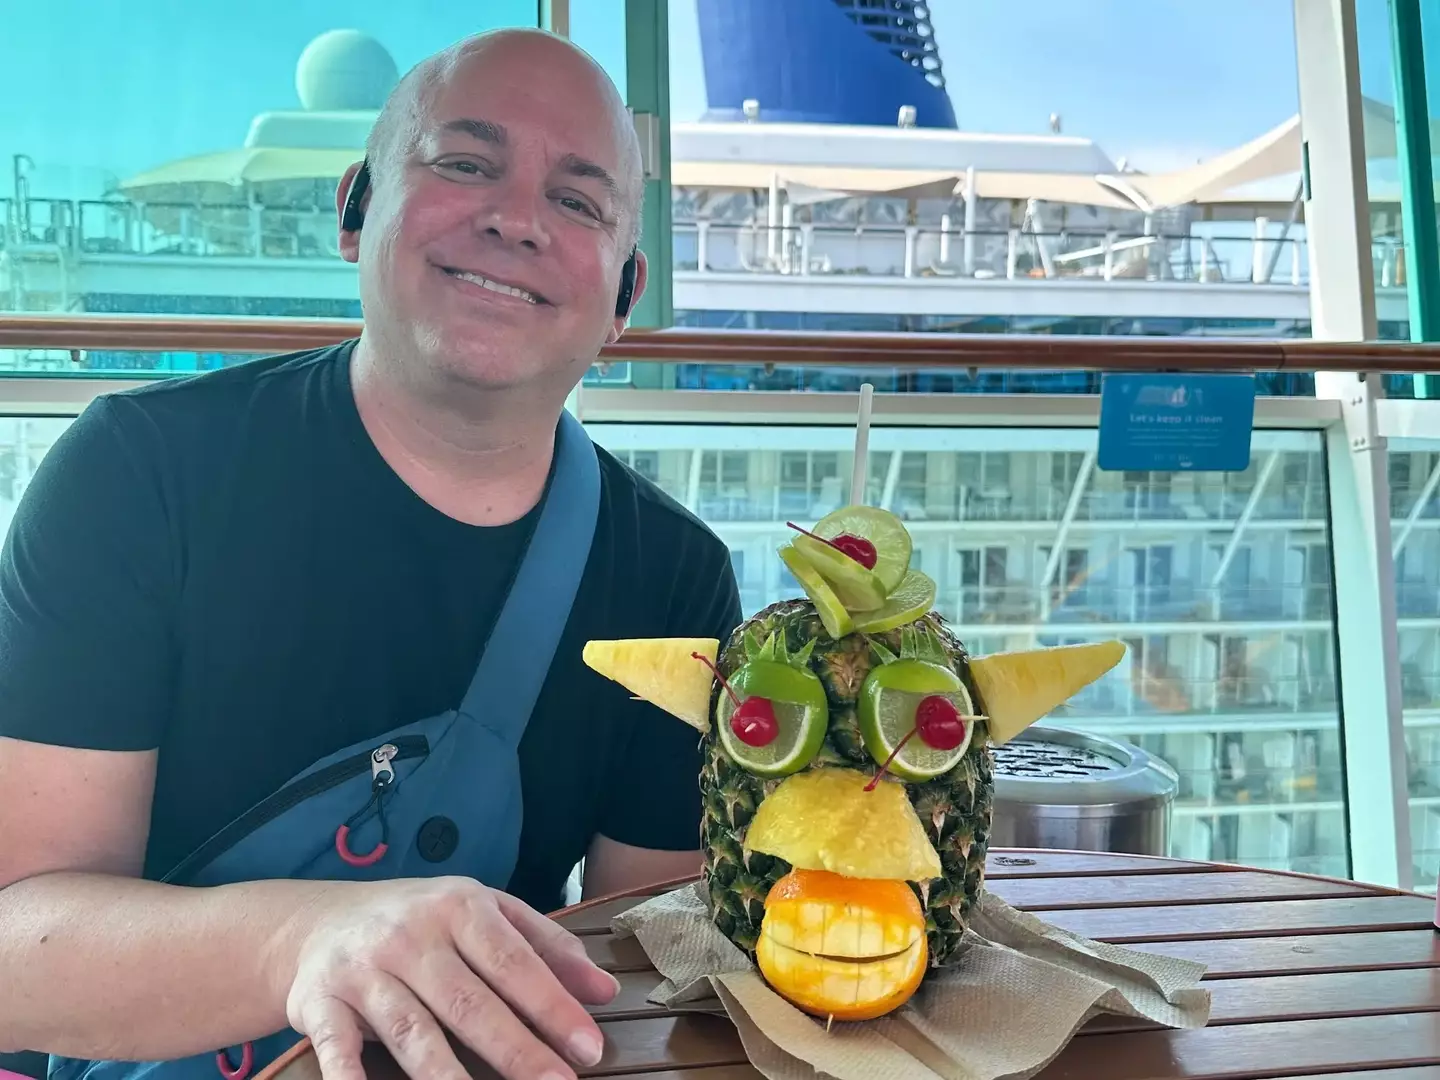 Ryan Gutridge, an IT cloud-solution engineer, started working remotely from a Royal Caribbean cruise ship in 2021.